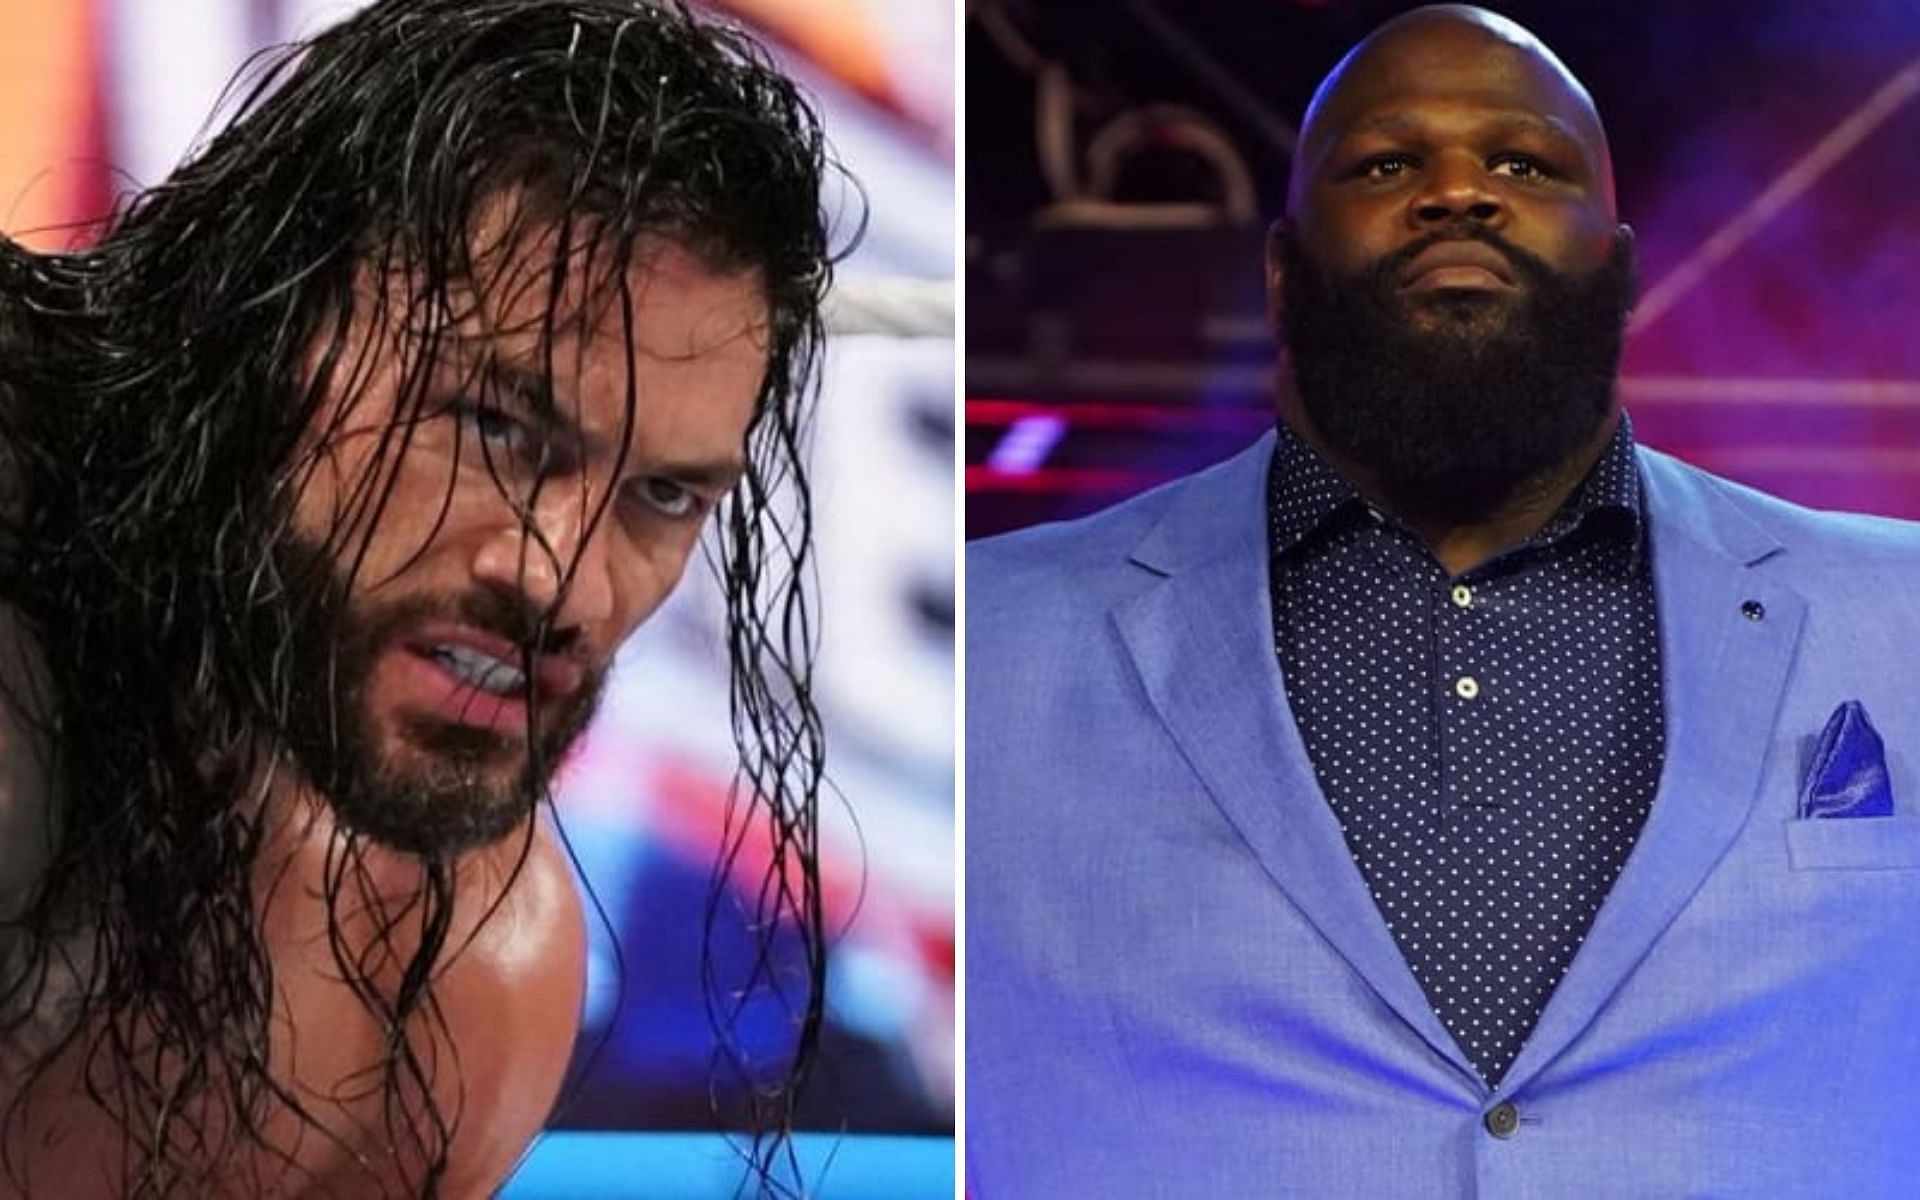 Mark Henry was full of praise for the 37-year-old star